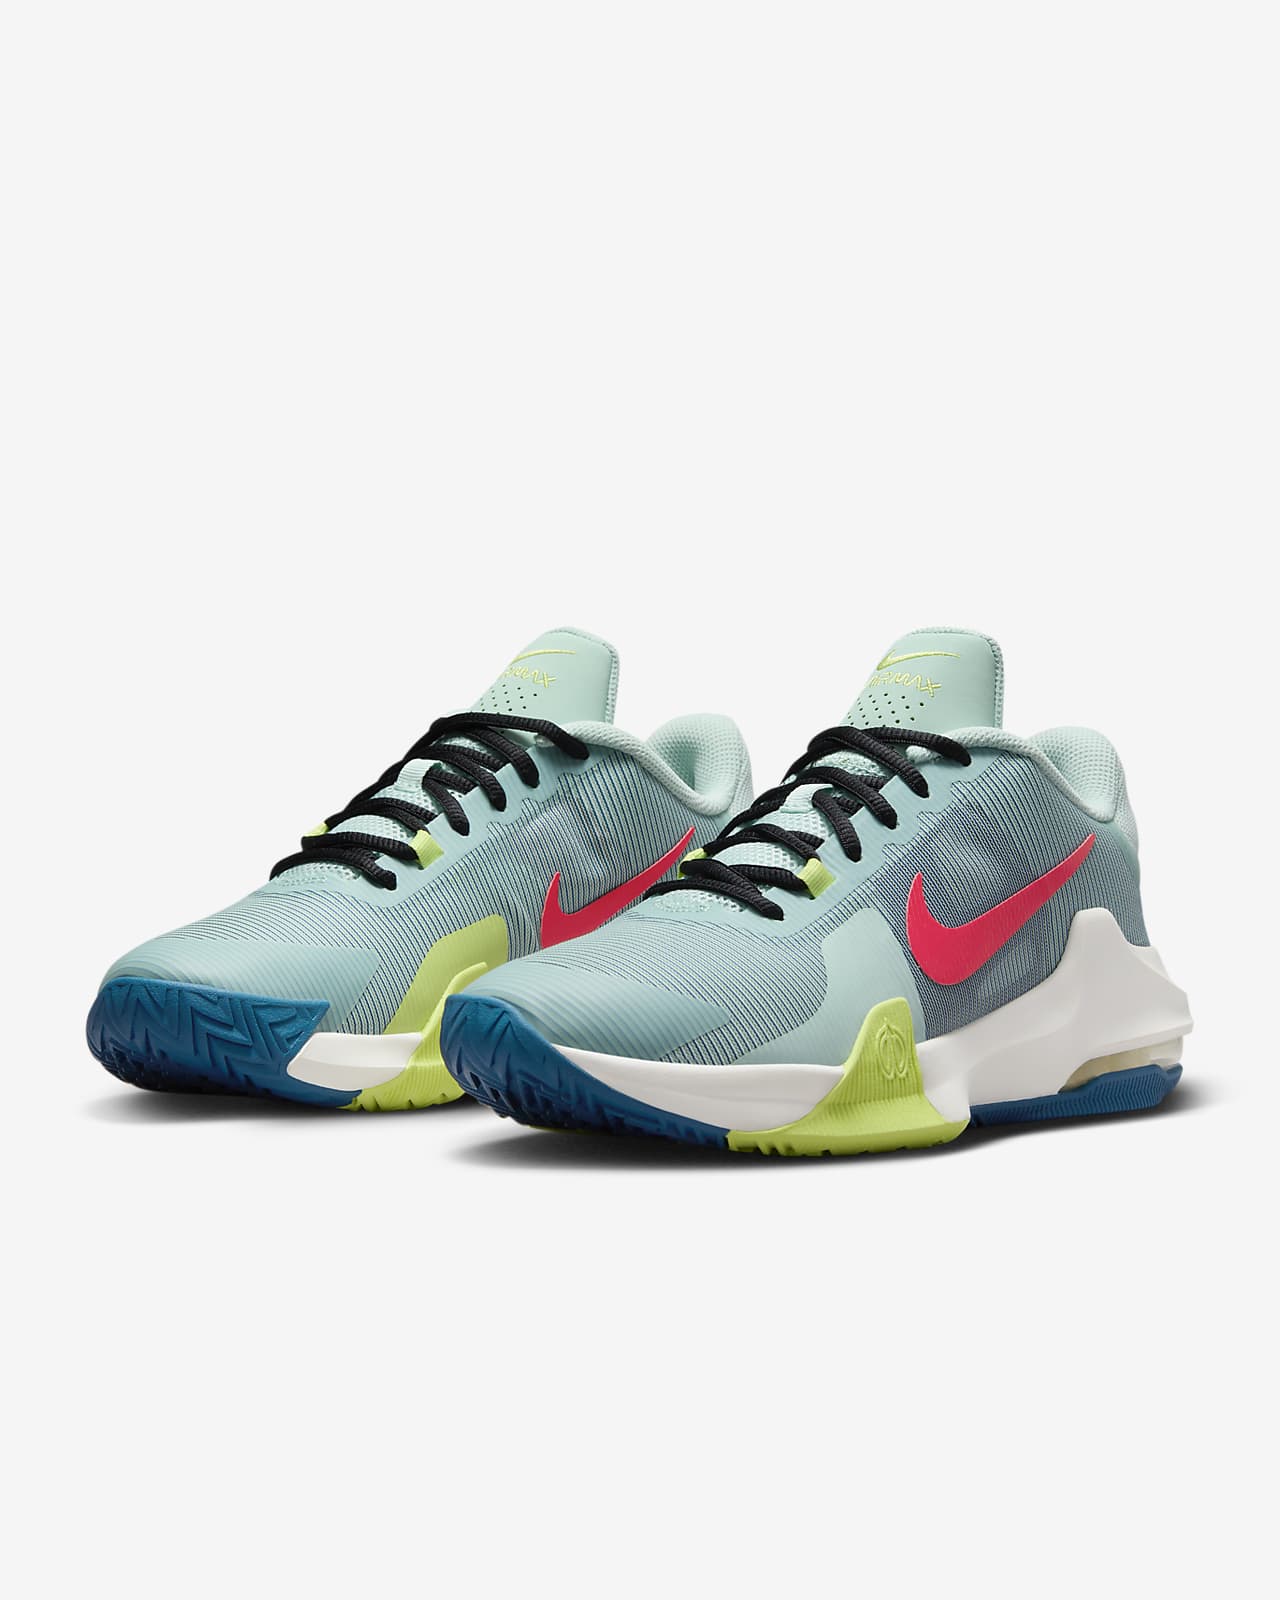 NIKE AIR MAX INFURIATE 2 MID Basketball Shoes For Men - Buy NIKE AIR MAX  INFURIATE 2 MID Basketball Shoes For Men Online at Best Price - Shop Online  for Footwears in India